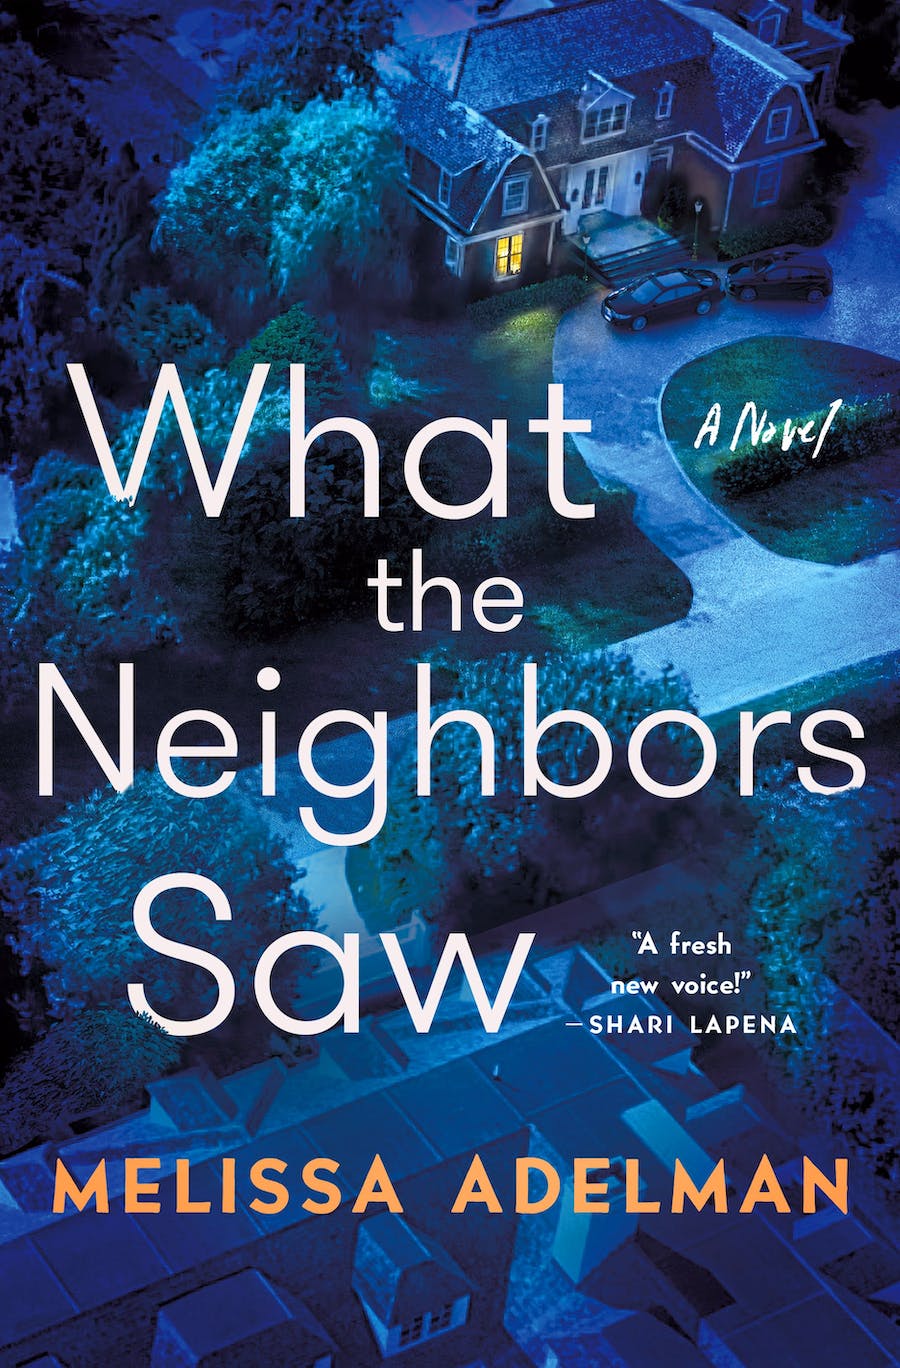 What the Neighbors Saw by Melissa Adelman